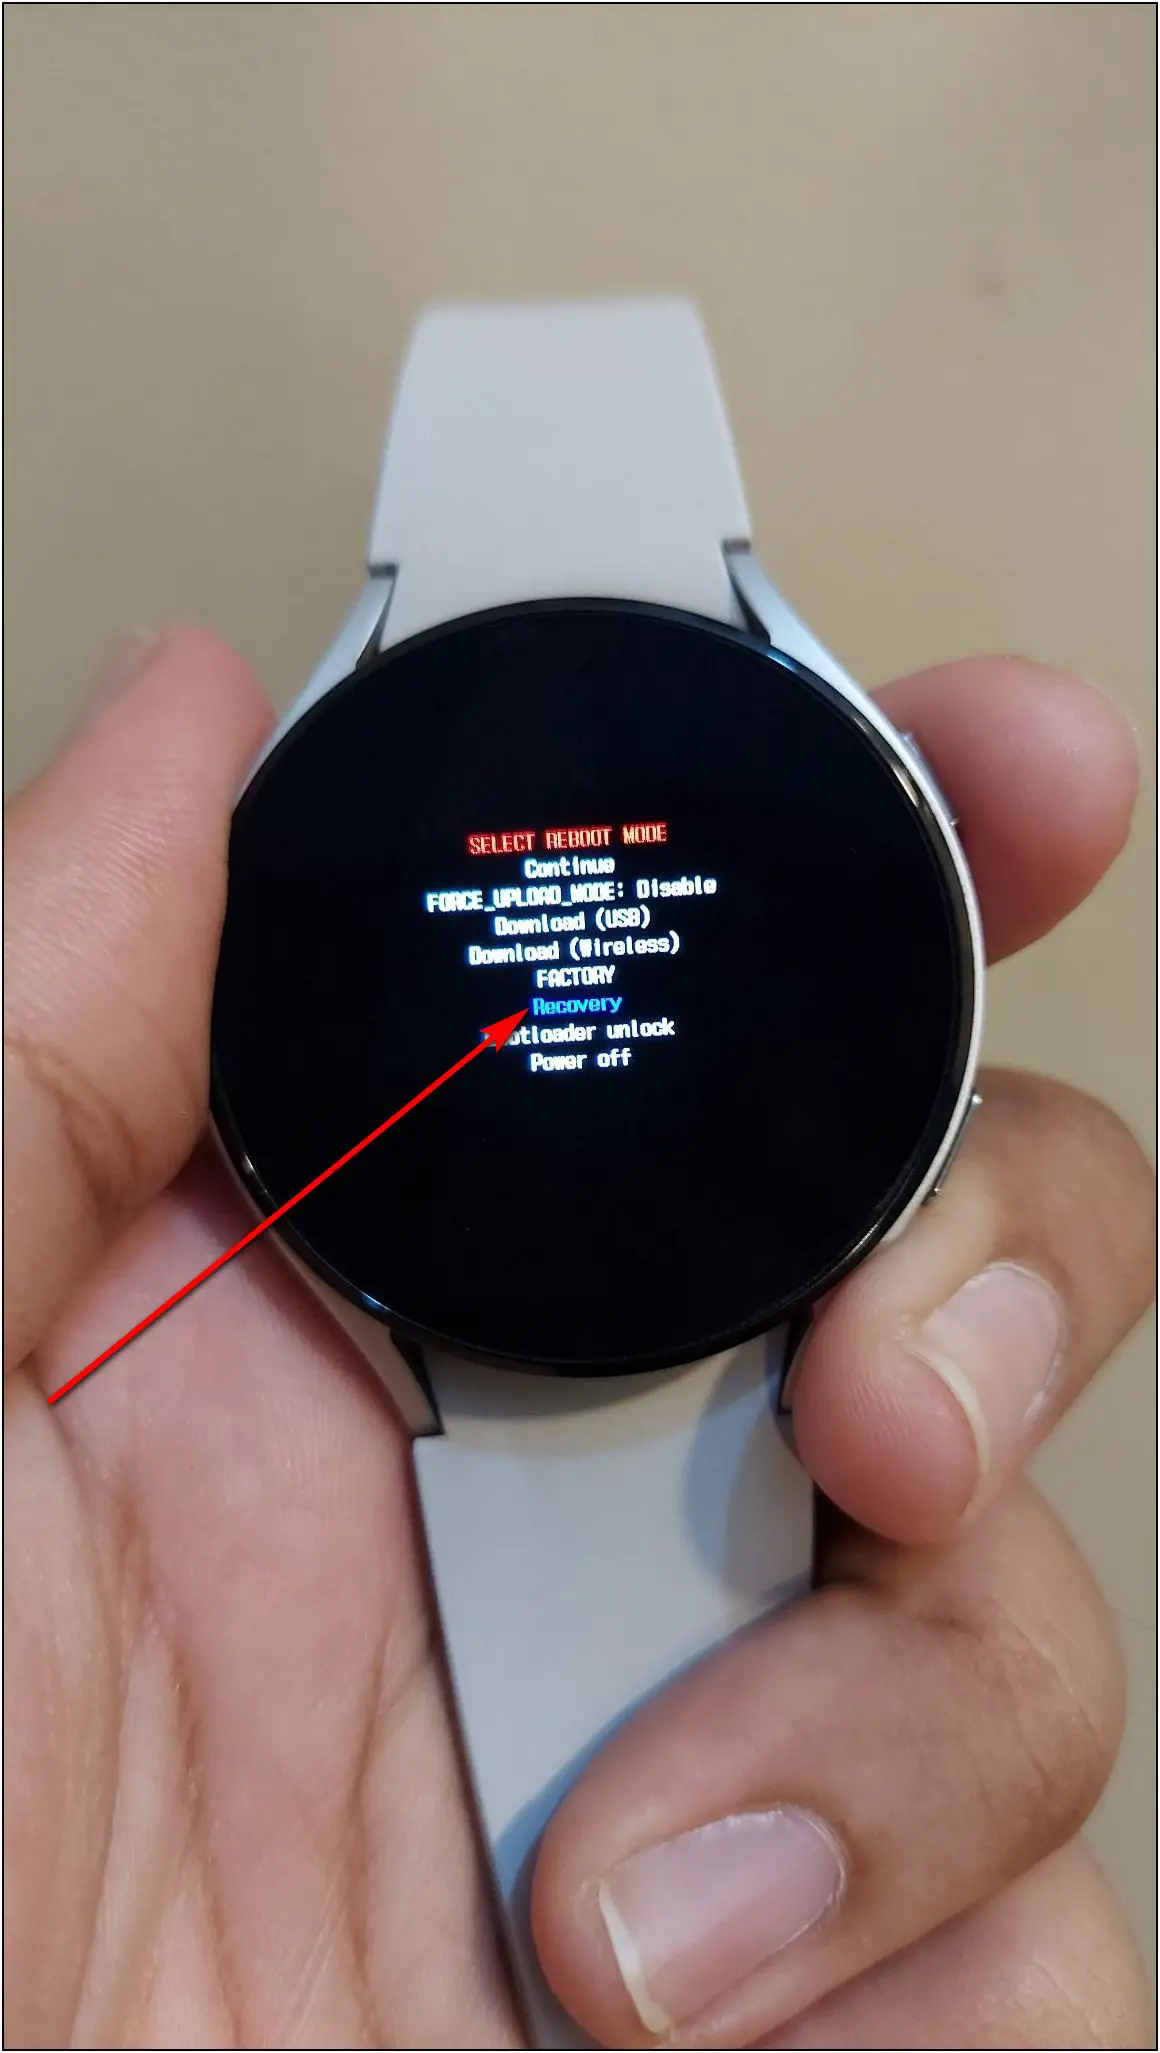 Clear Cache Partition on Galaxy Watch 4 Wear OS